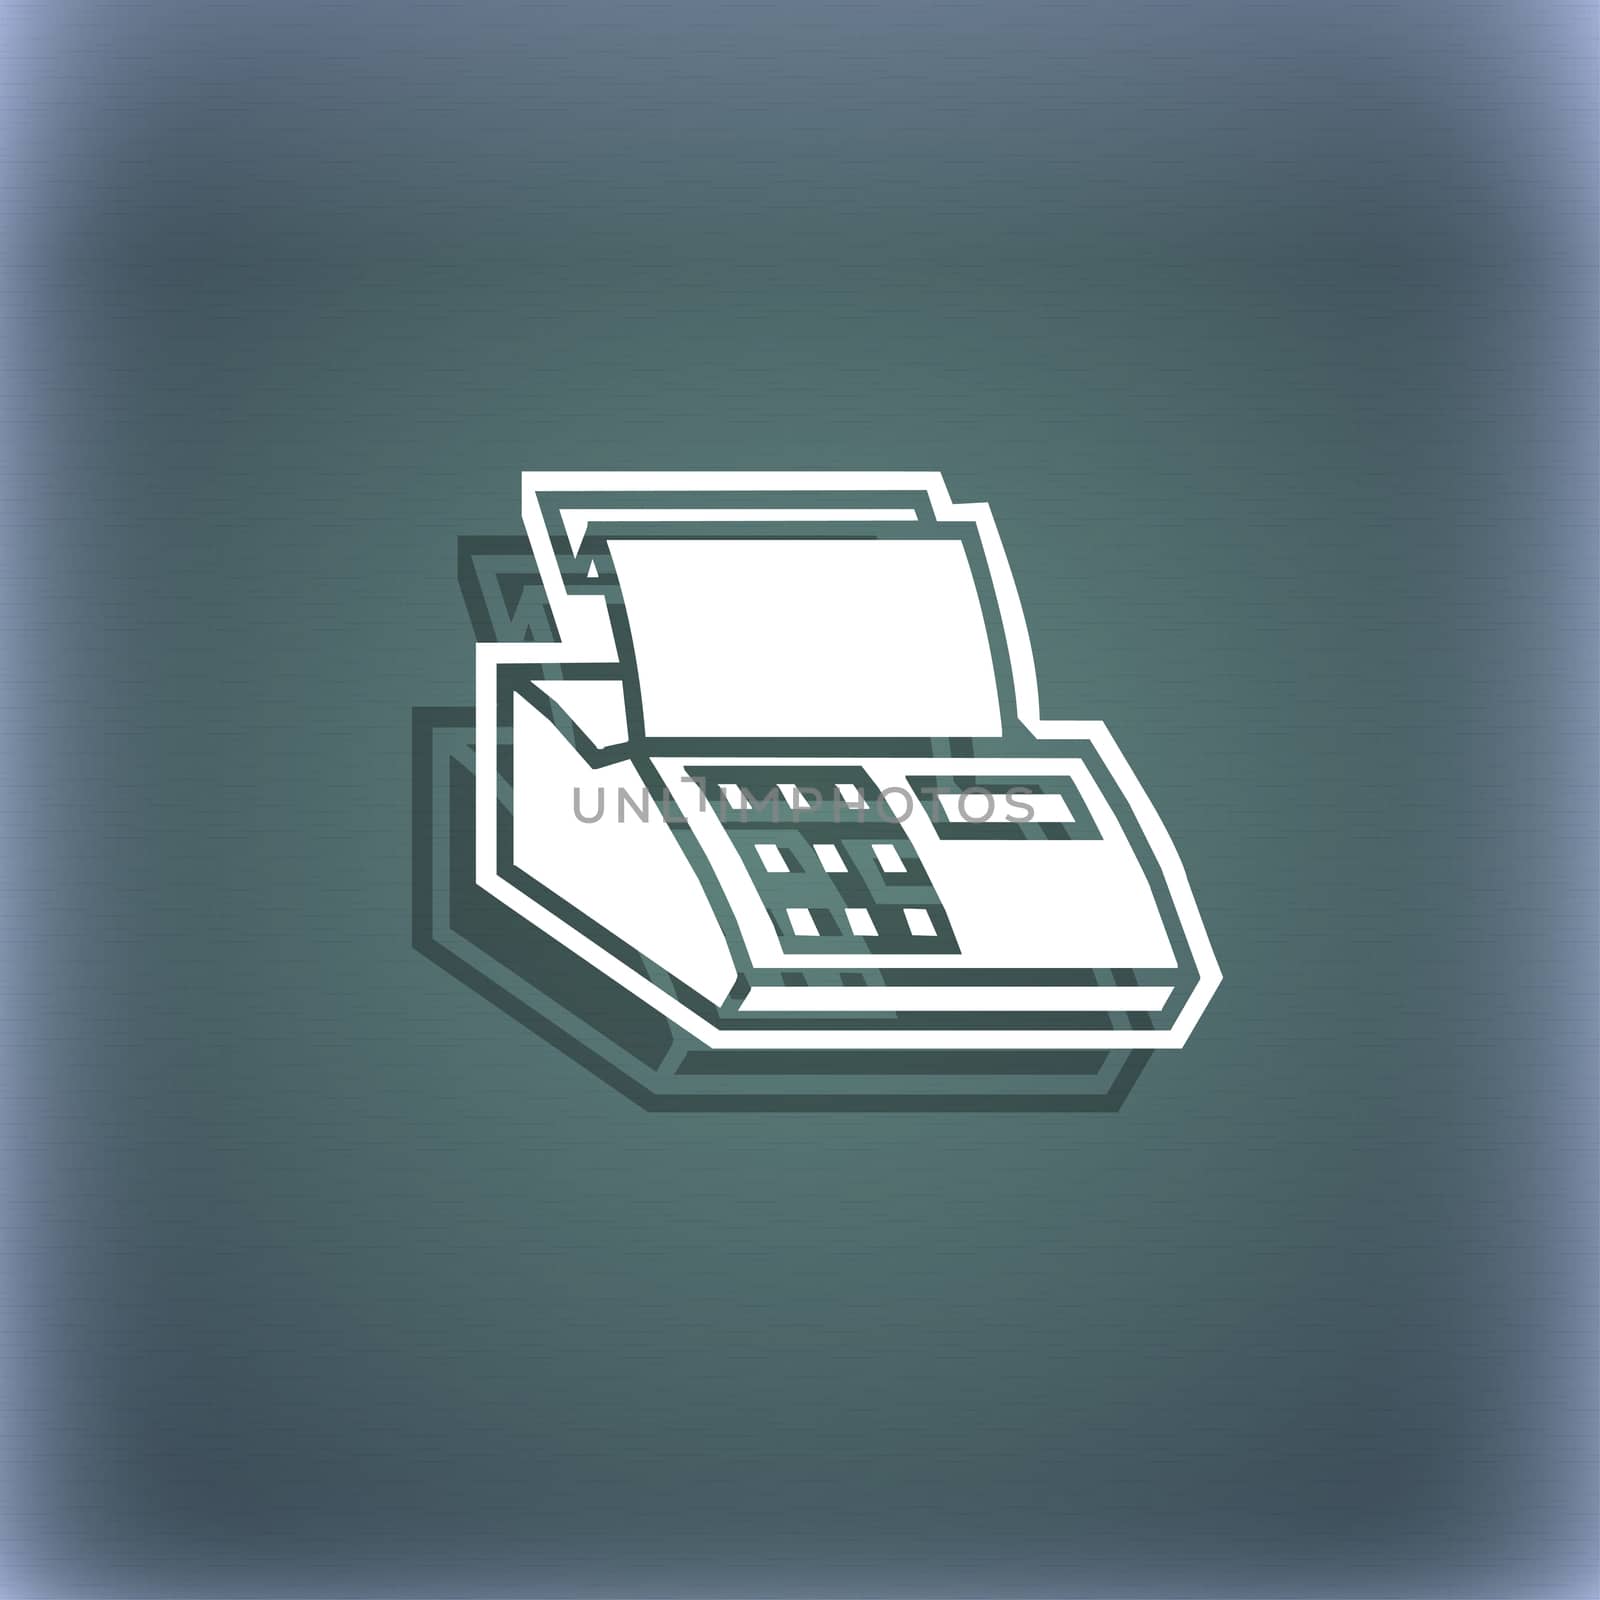 Cash register machine icon symbol on the blue-green abstract background with shadow and space for your text.  by serhii_lohvyniuk